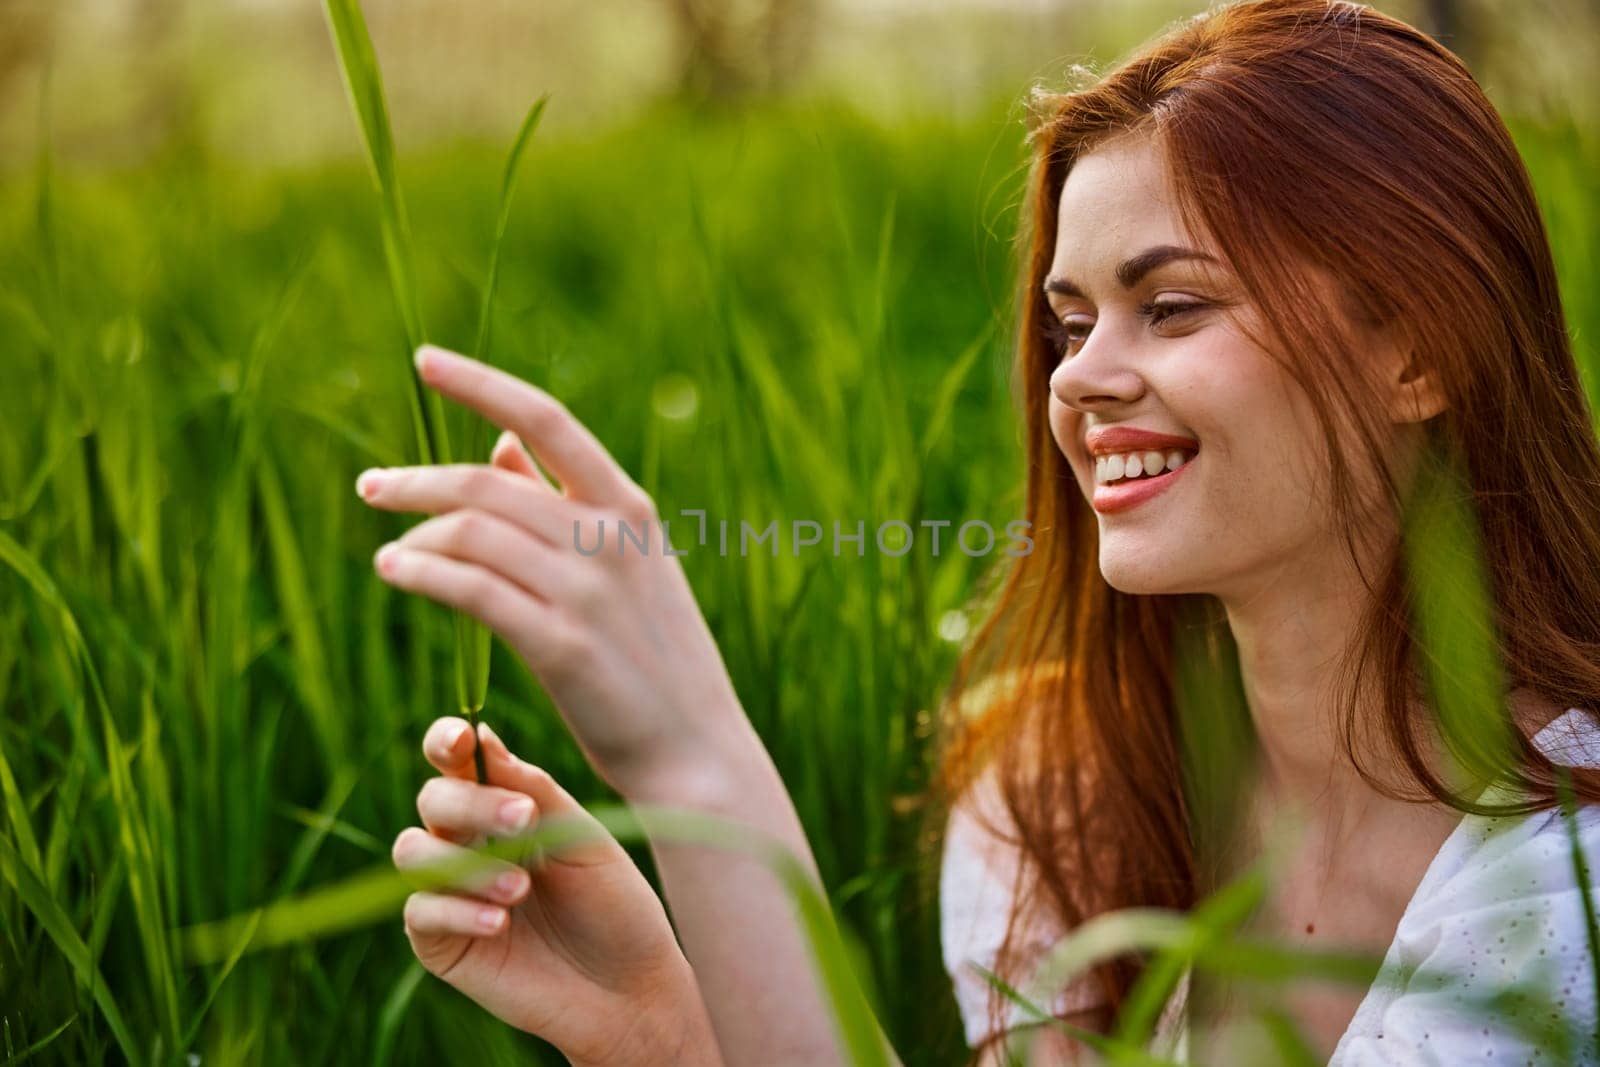 woman resting sitting in tall grass on a sunny day. High quality photo